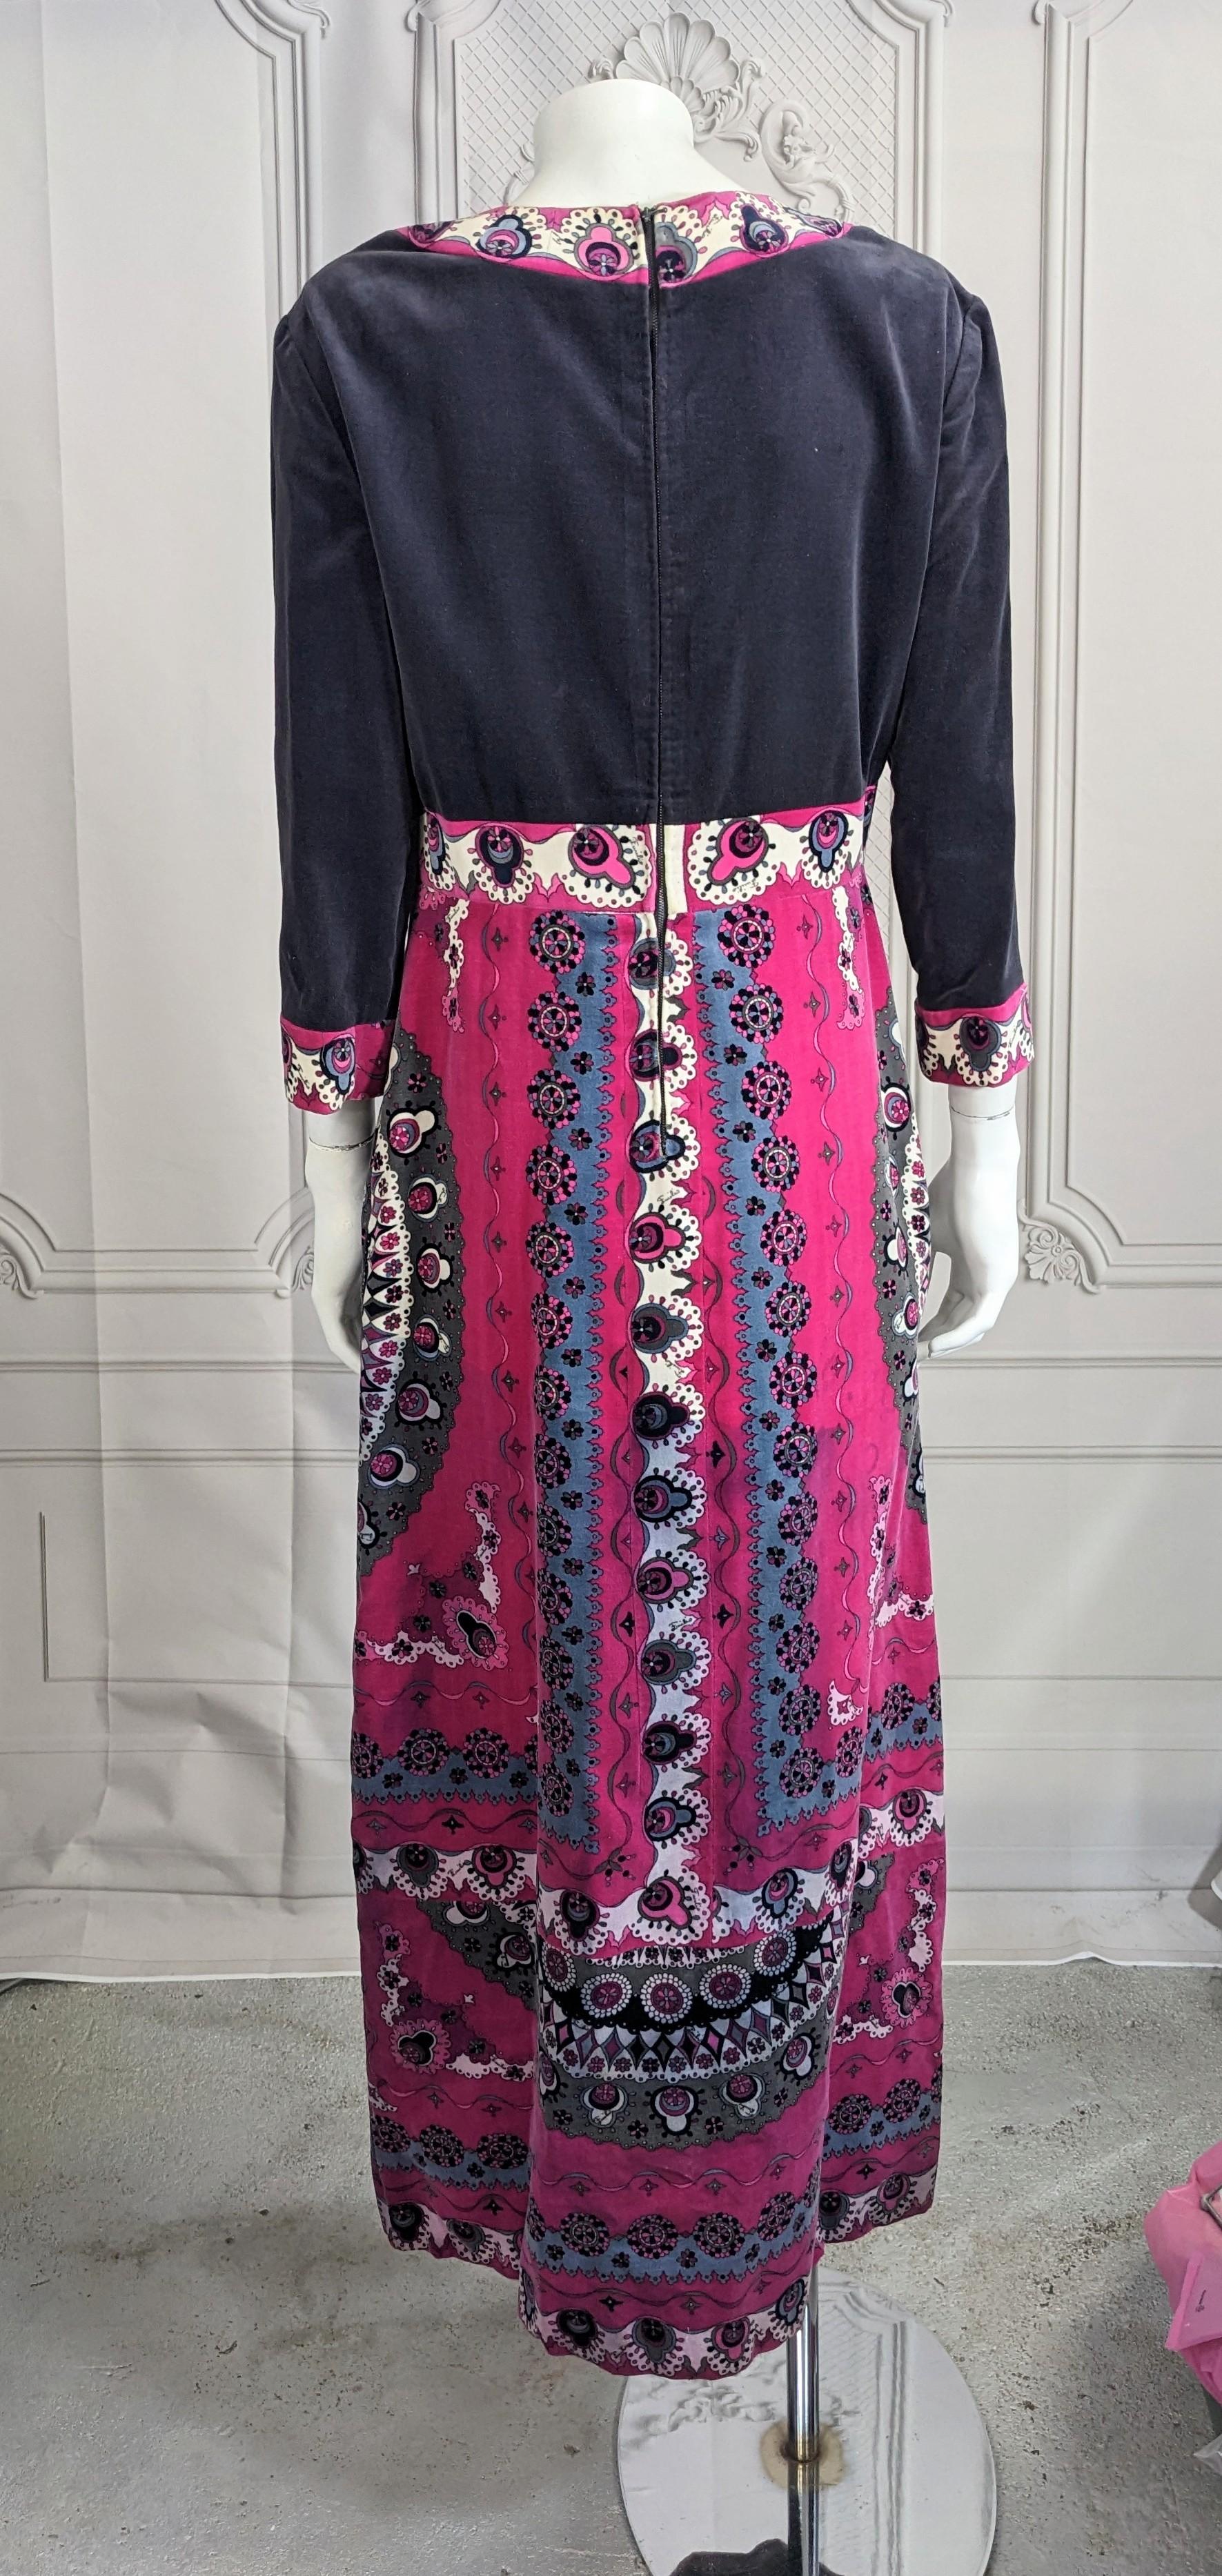 Emilio Pucci Graphic Velvet Gown with Choker For Sale 2